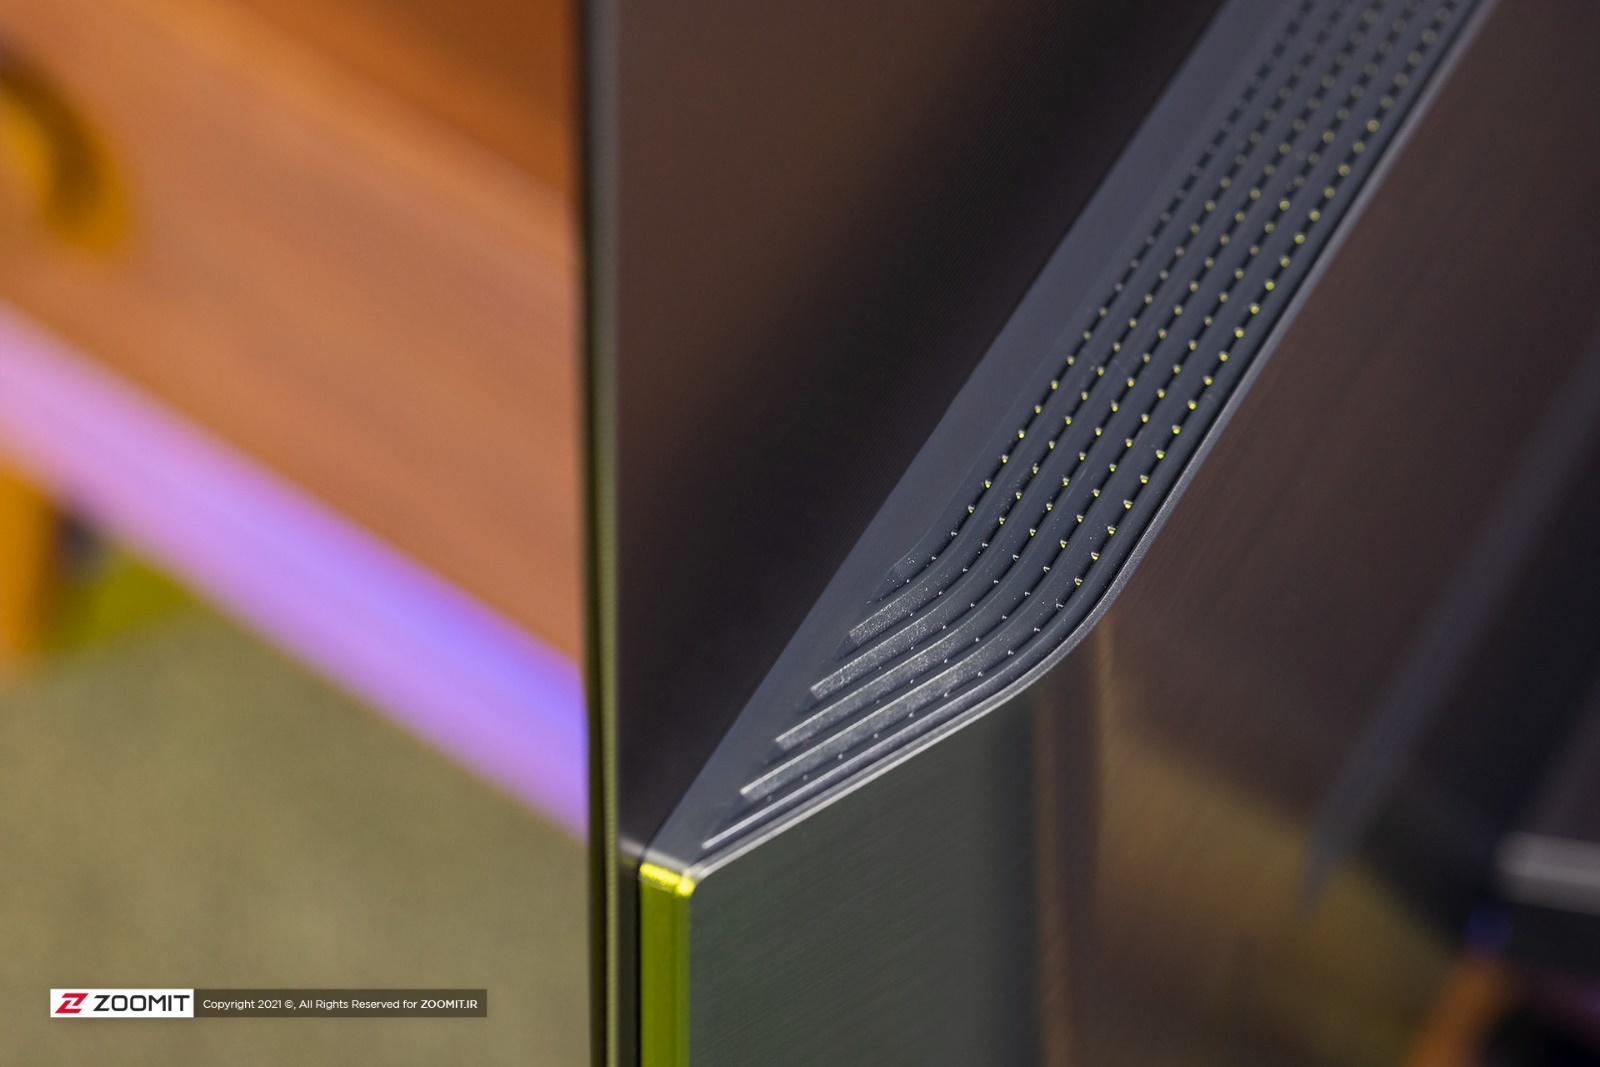 Thickness of the bottom of the LG C1 OLED TV